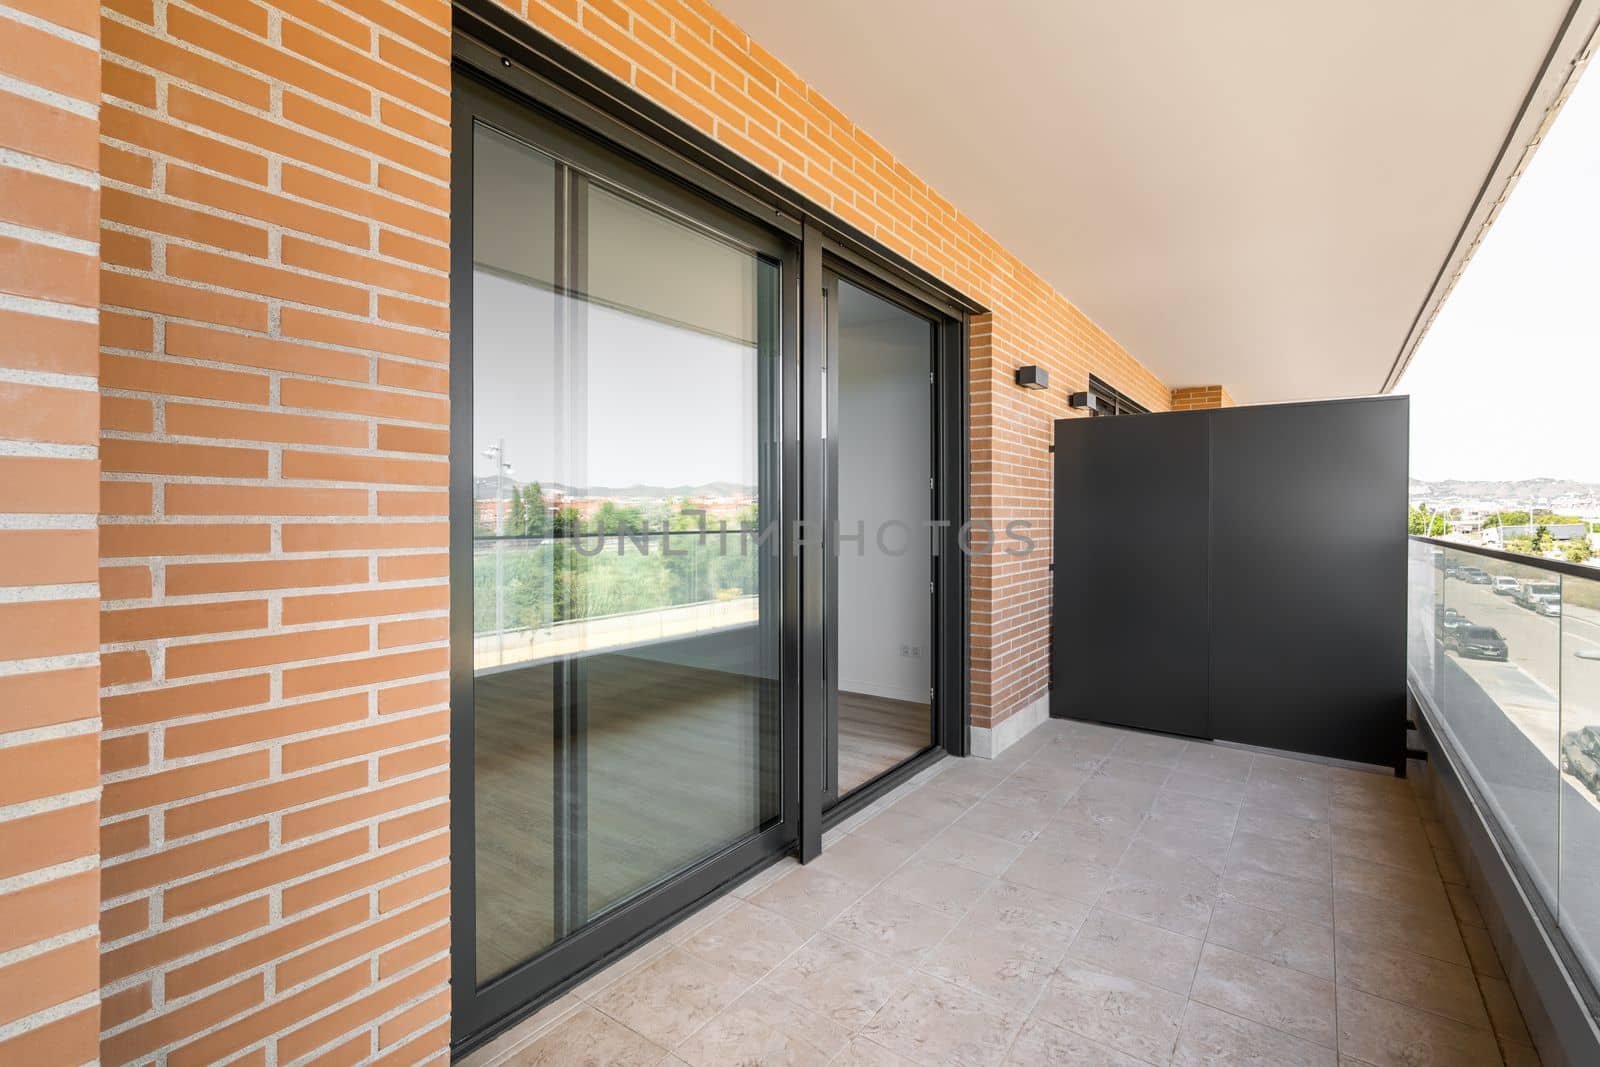 Large entrance balcony door made of black plastic with a sliding system. Terrace with marble floor and glass railings. The walls of the building are made of yellow bricks. by apavlin